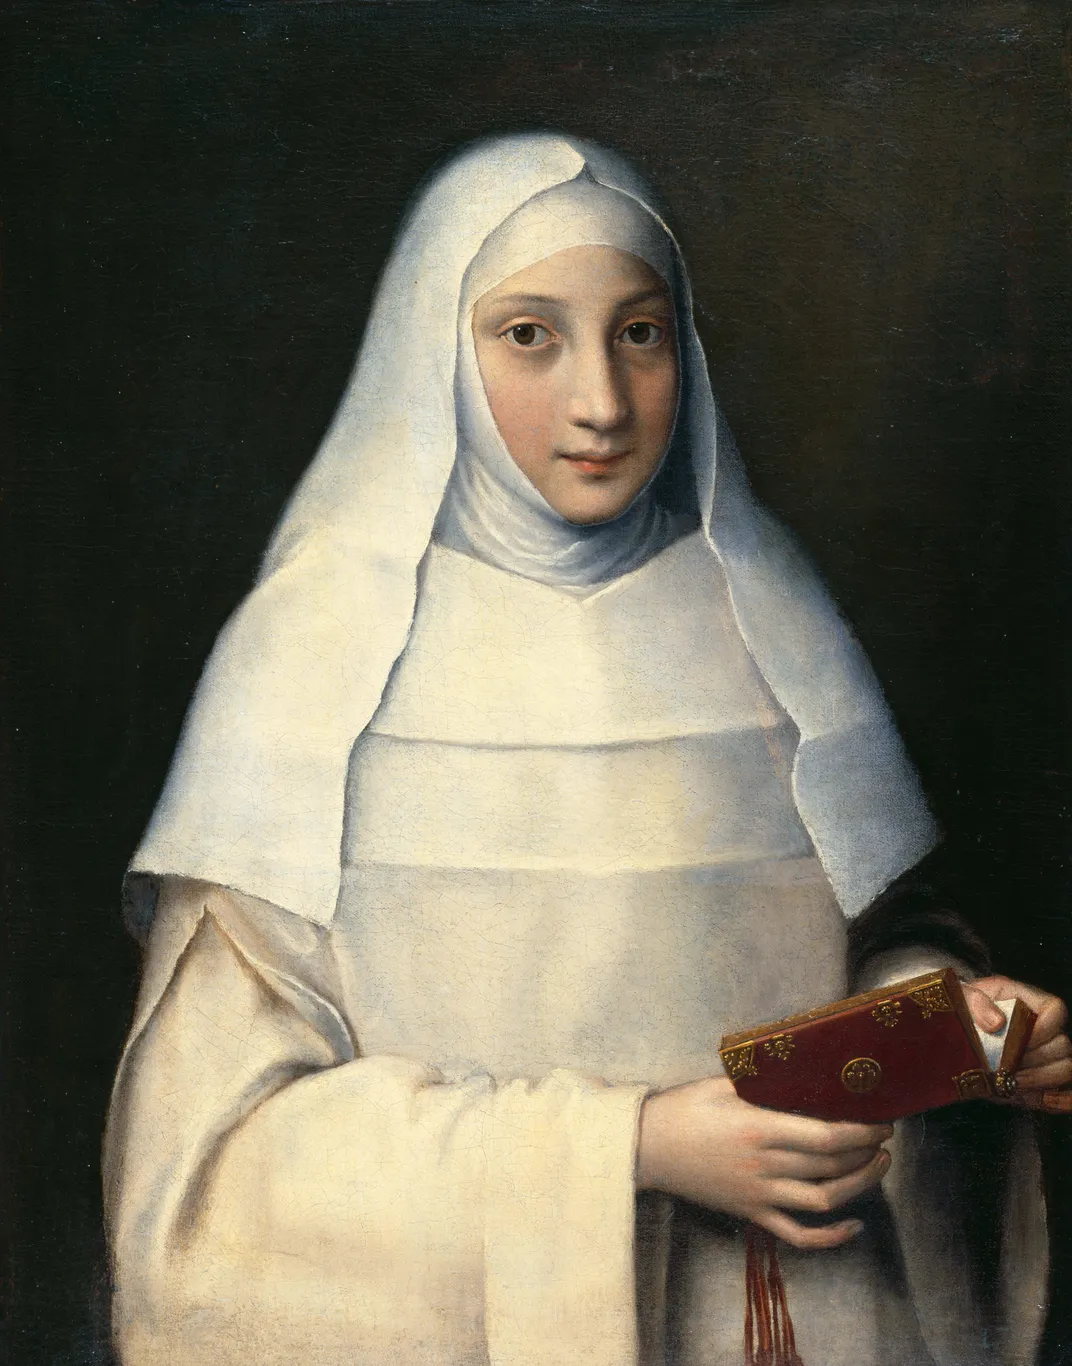 A portrait of a woman in pale white garbs, making eye contact with the viewer and holding a book open in her hands